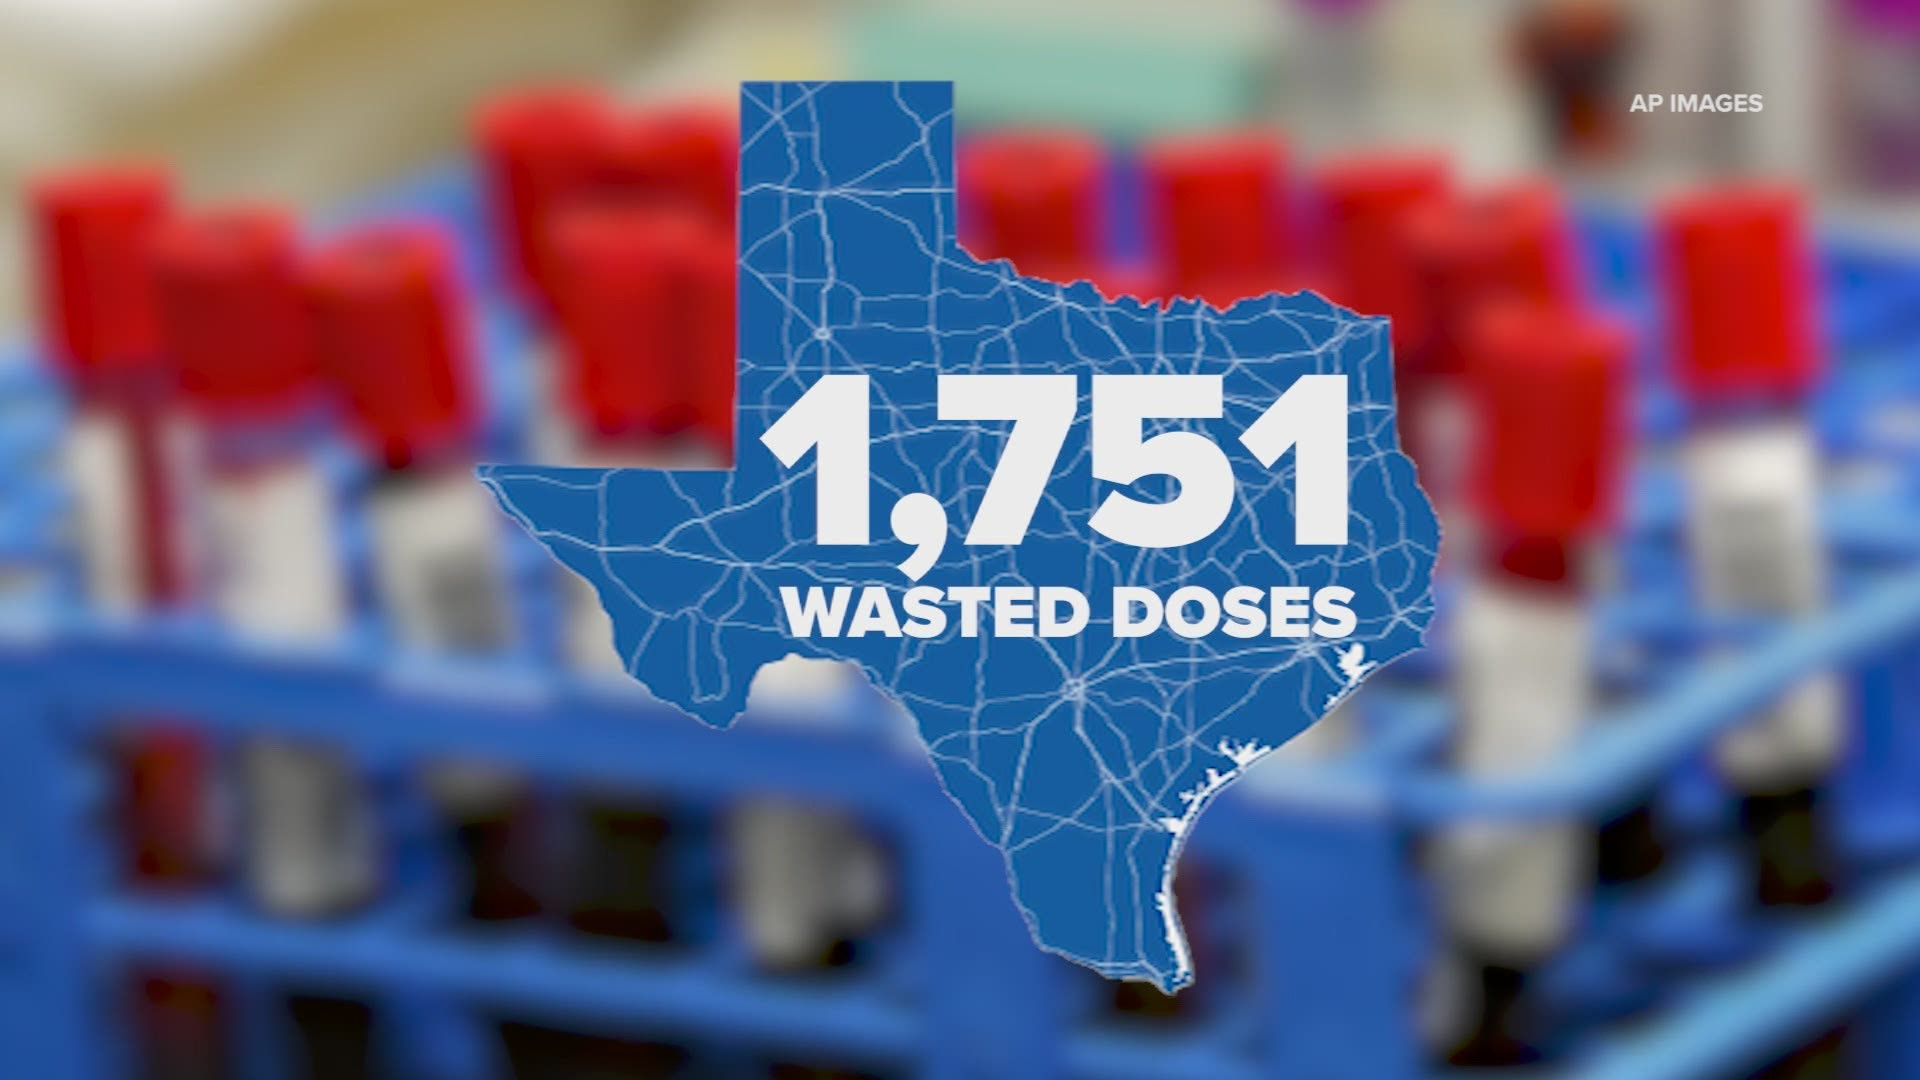 According to the state, nearly 2,000 doses of the COVID vaccine have been wasted in Texas. About 20% of them due to refrigeration issues.